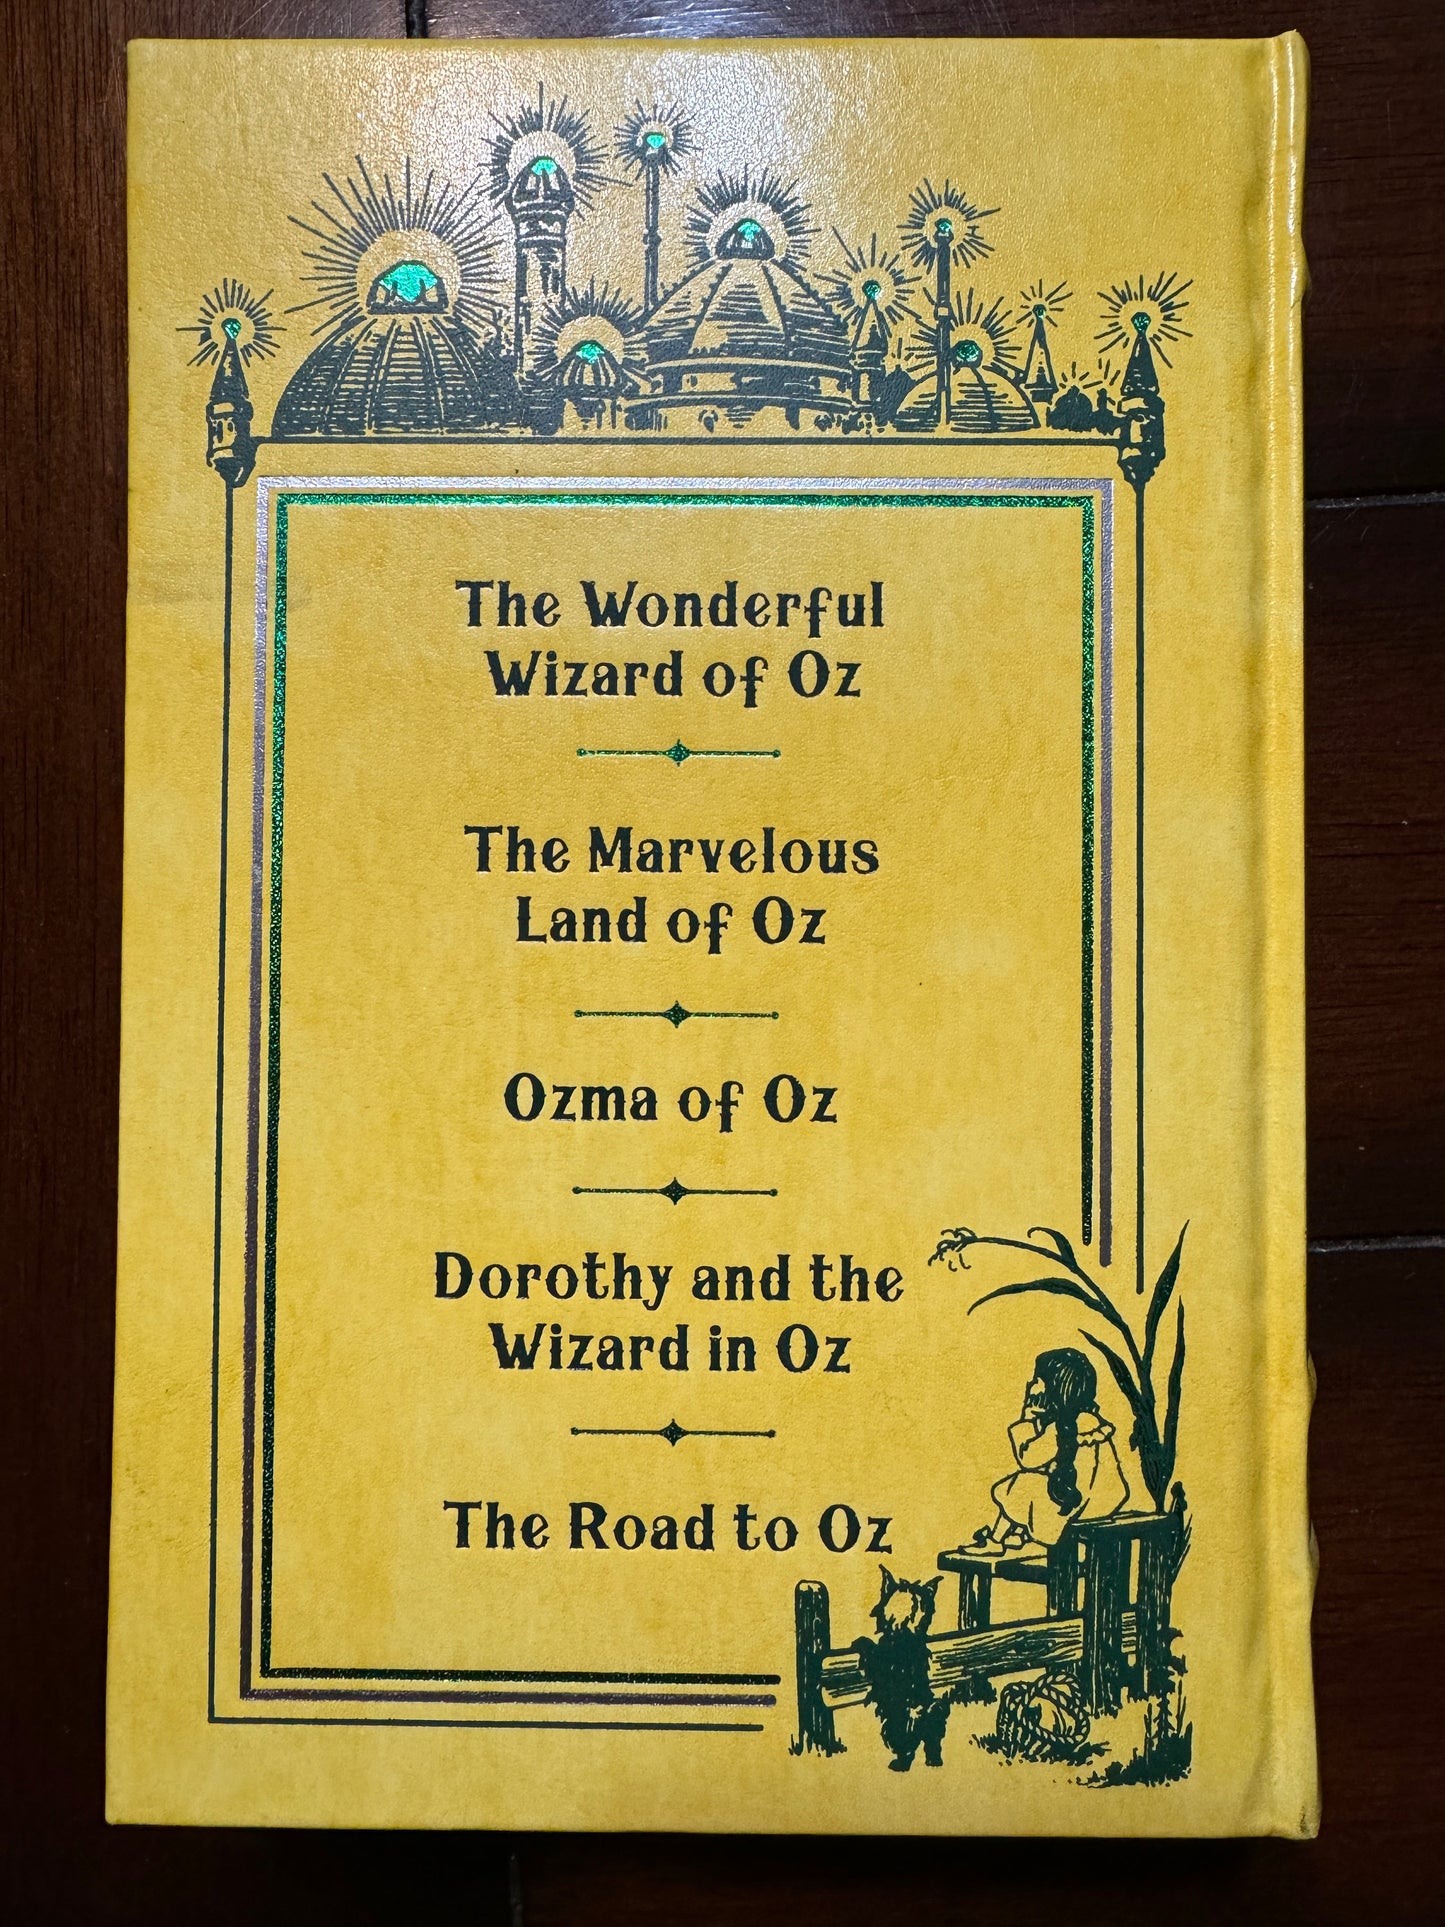 Wizard of oz The First Five Novels  (Barnes & Noble Collectible Editions)